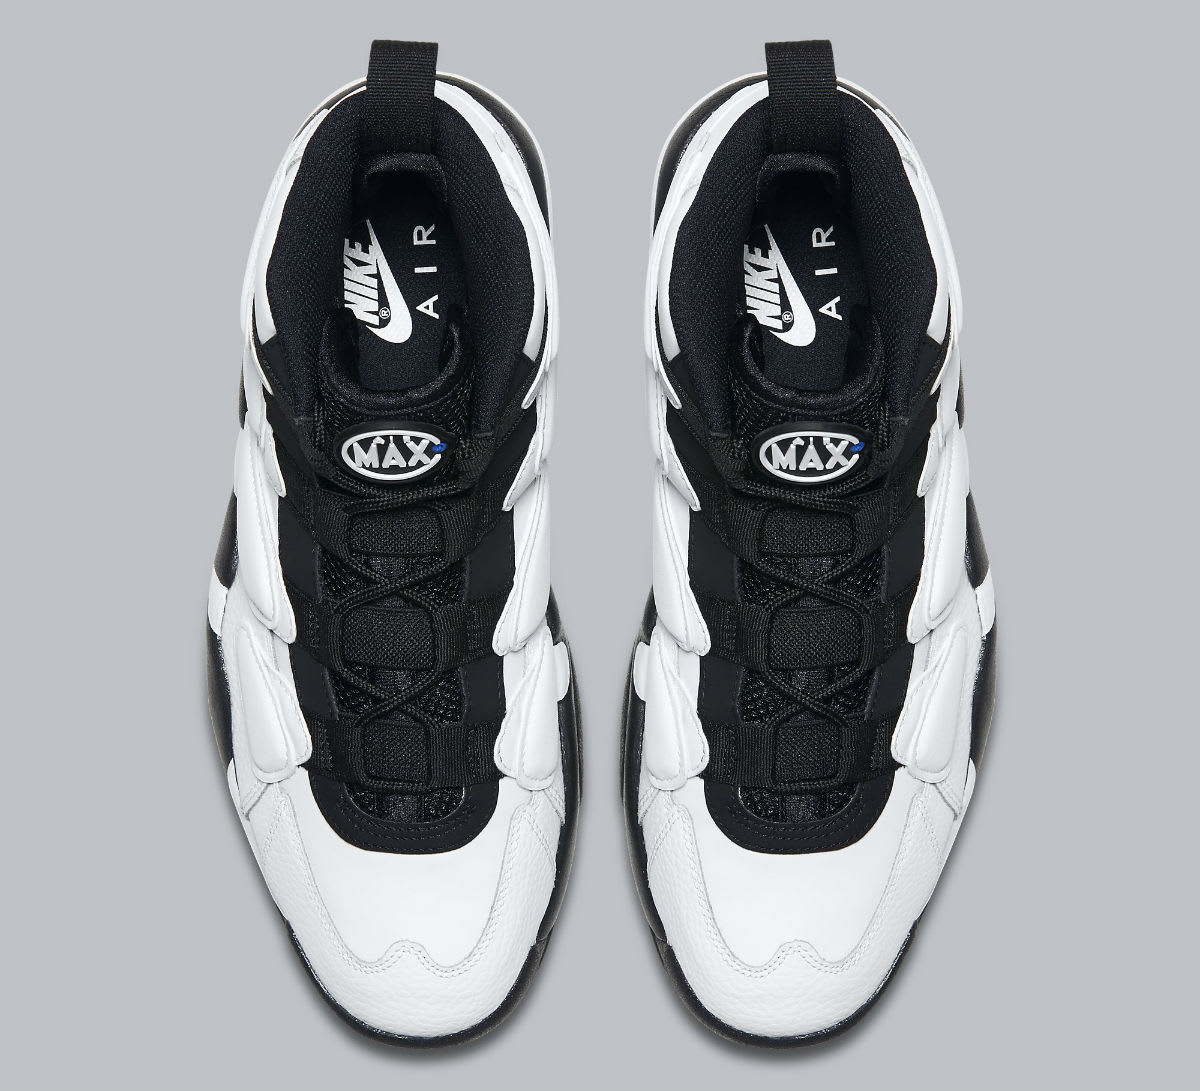 Nike Air Max2 Uptempo White/Black Release Date Top 922934-102